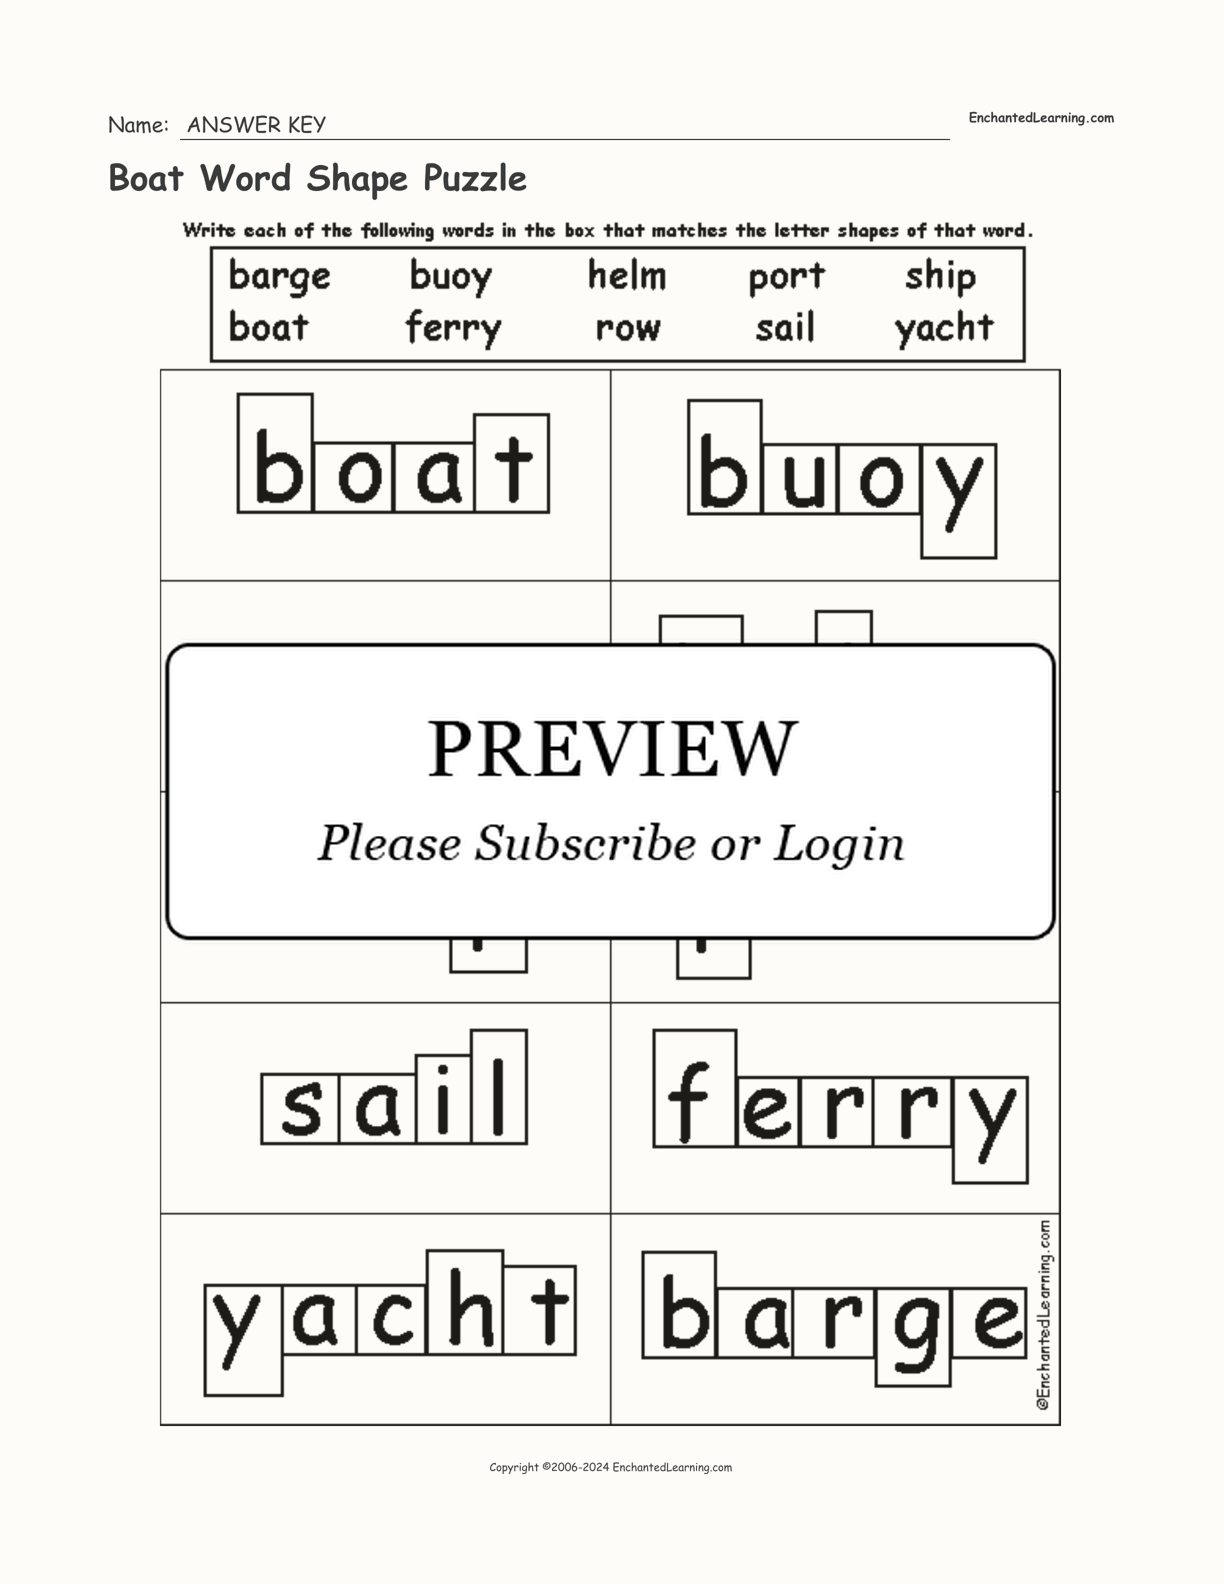 Boat Word Shape Puzzle interactive worksheet page 2